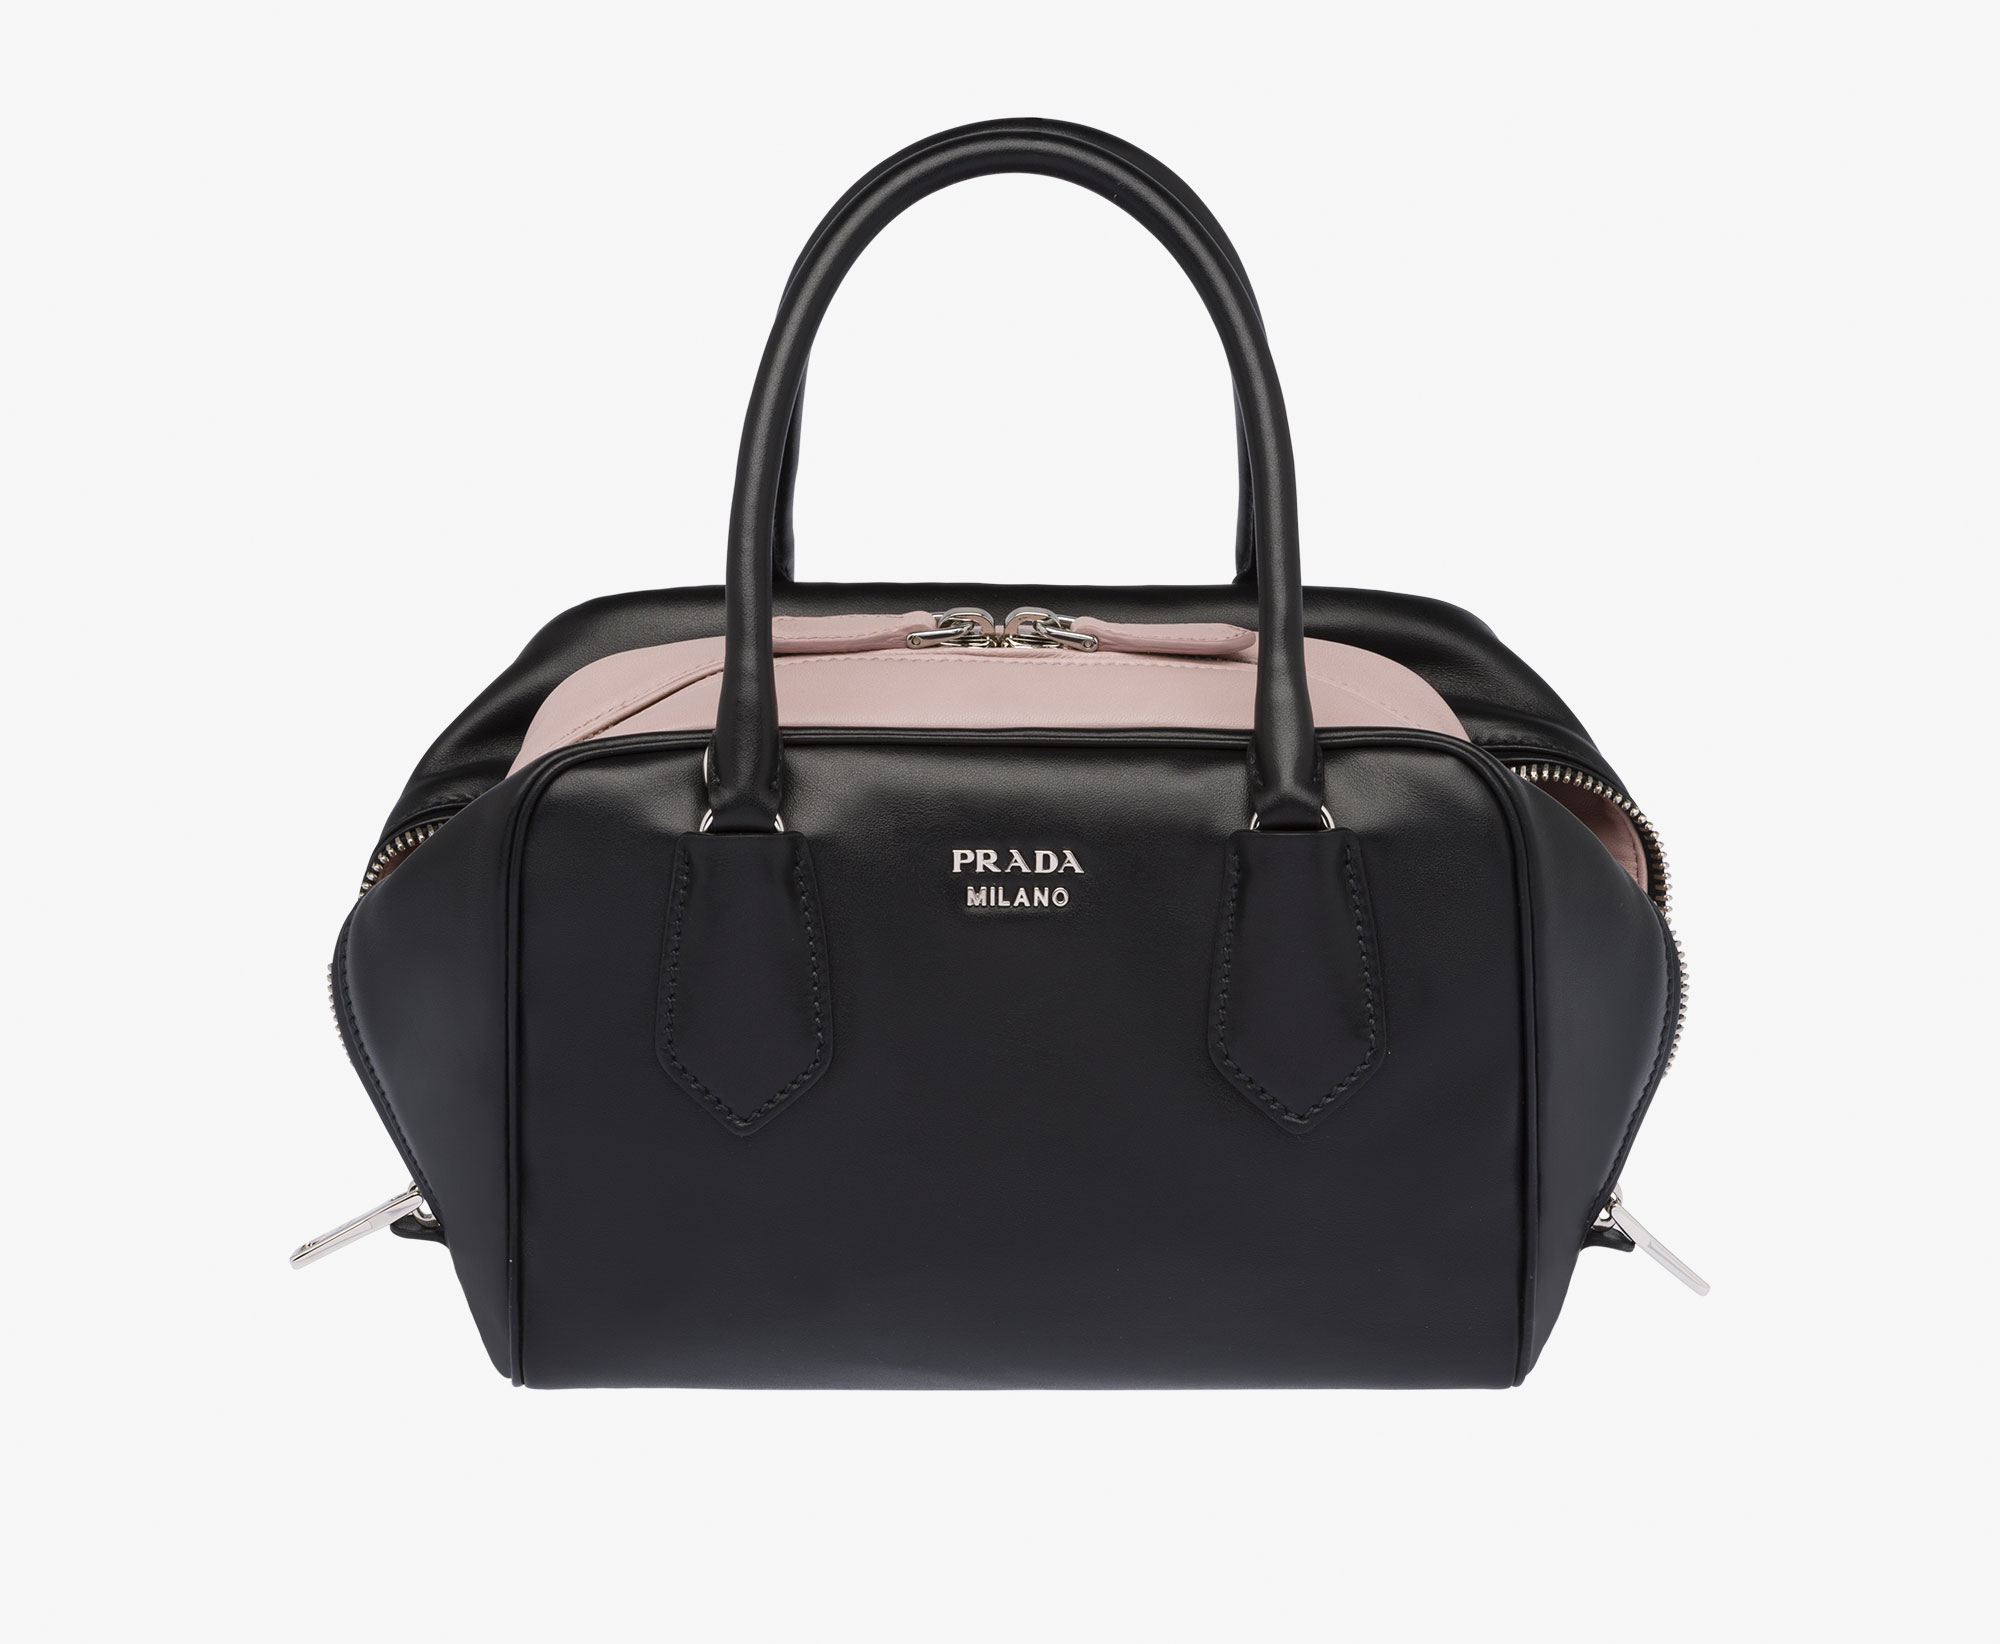 Prada Inside Tote Bag Reference Guide | Spotted Fashion  